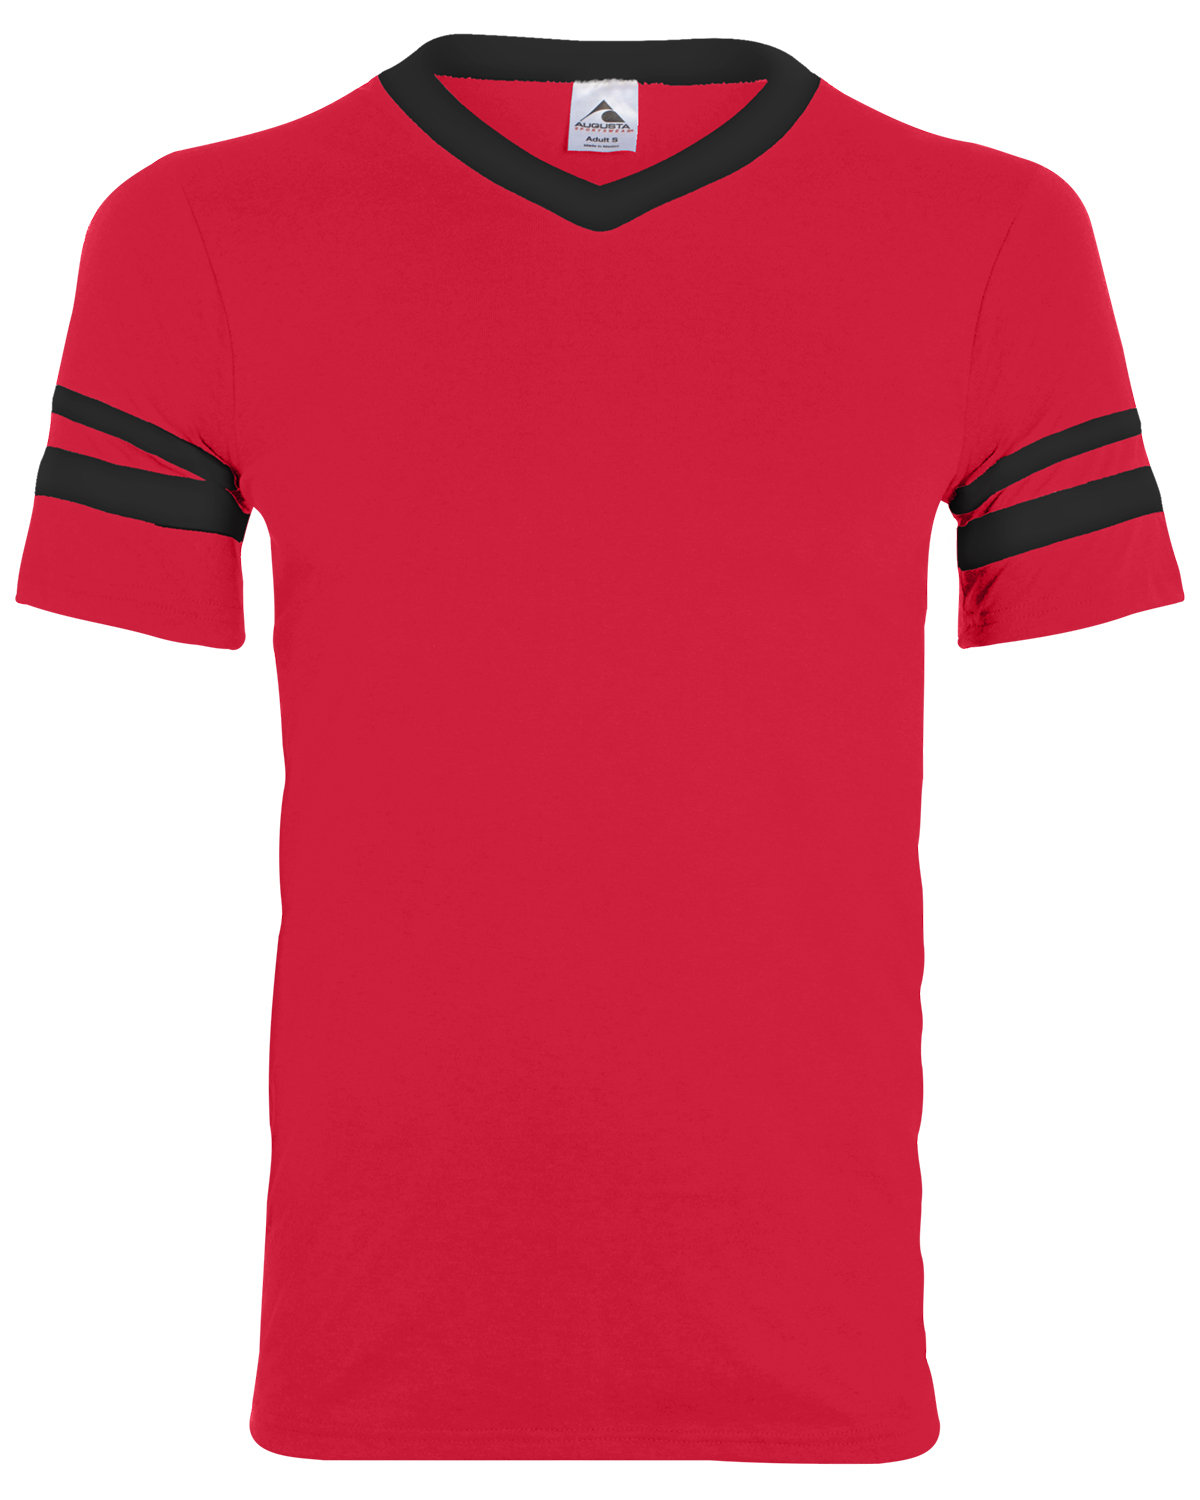 Front view of Youth Sleeve Stripe Jersey